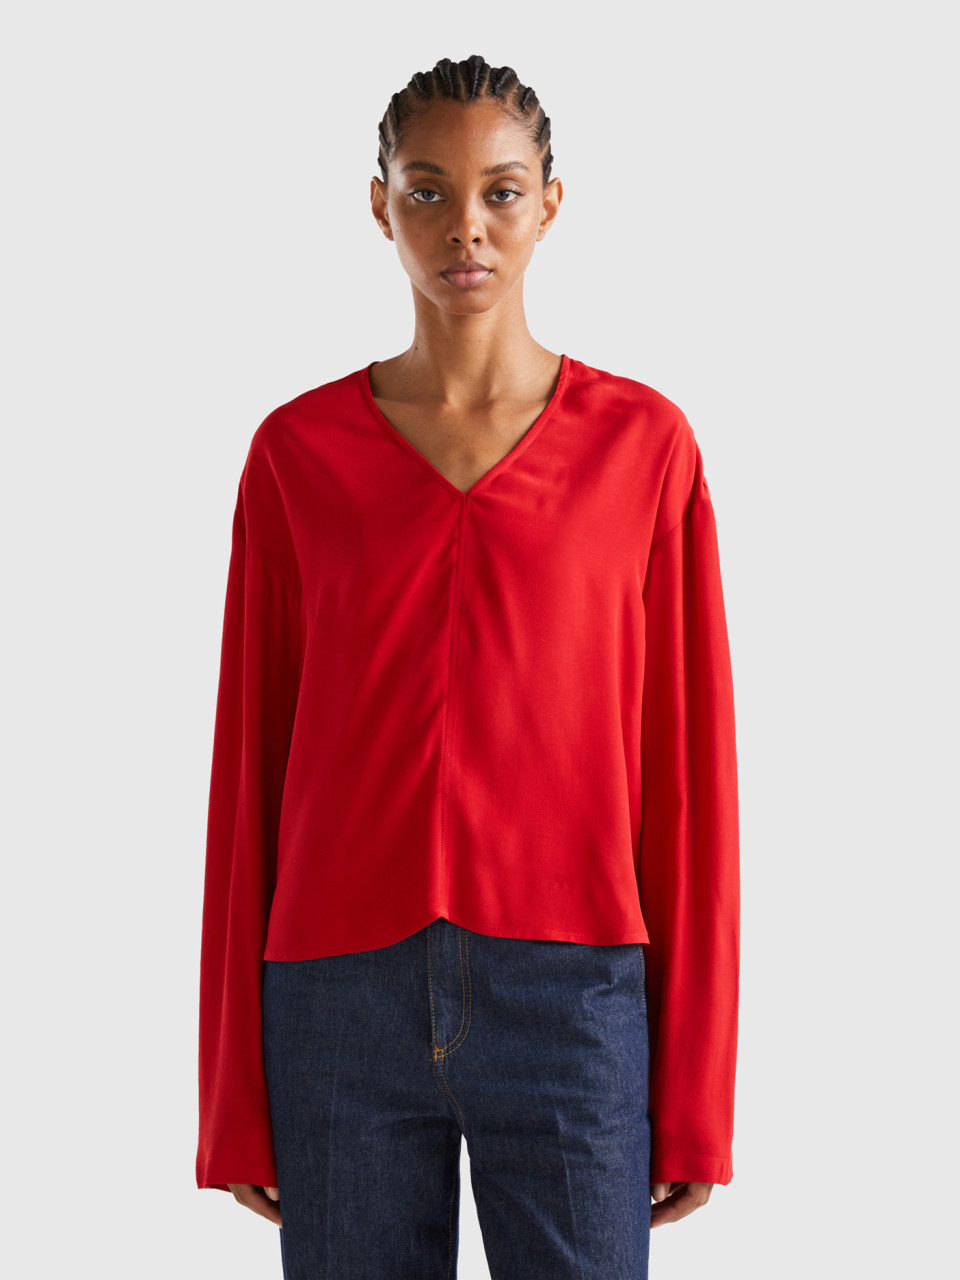 Benetton, Blouse With V-neck, Red, Women